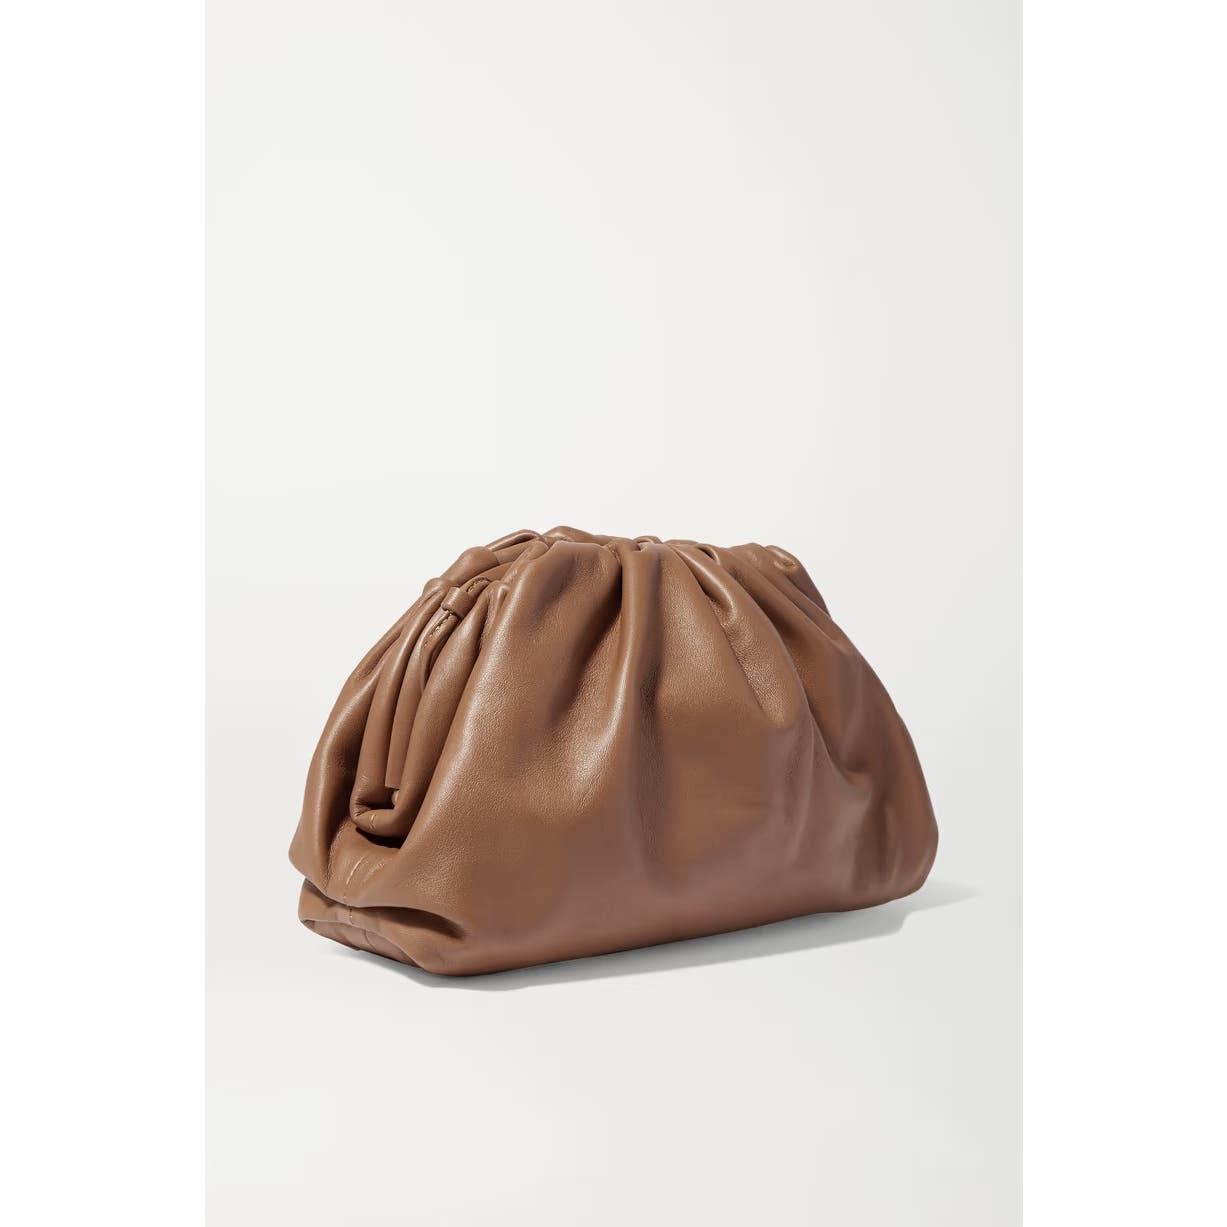 Bottega Veneta Large The Pouch Bag In Nude Brown Leather